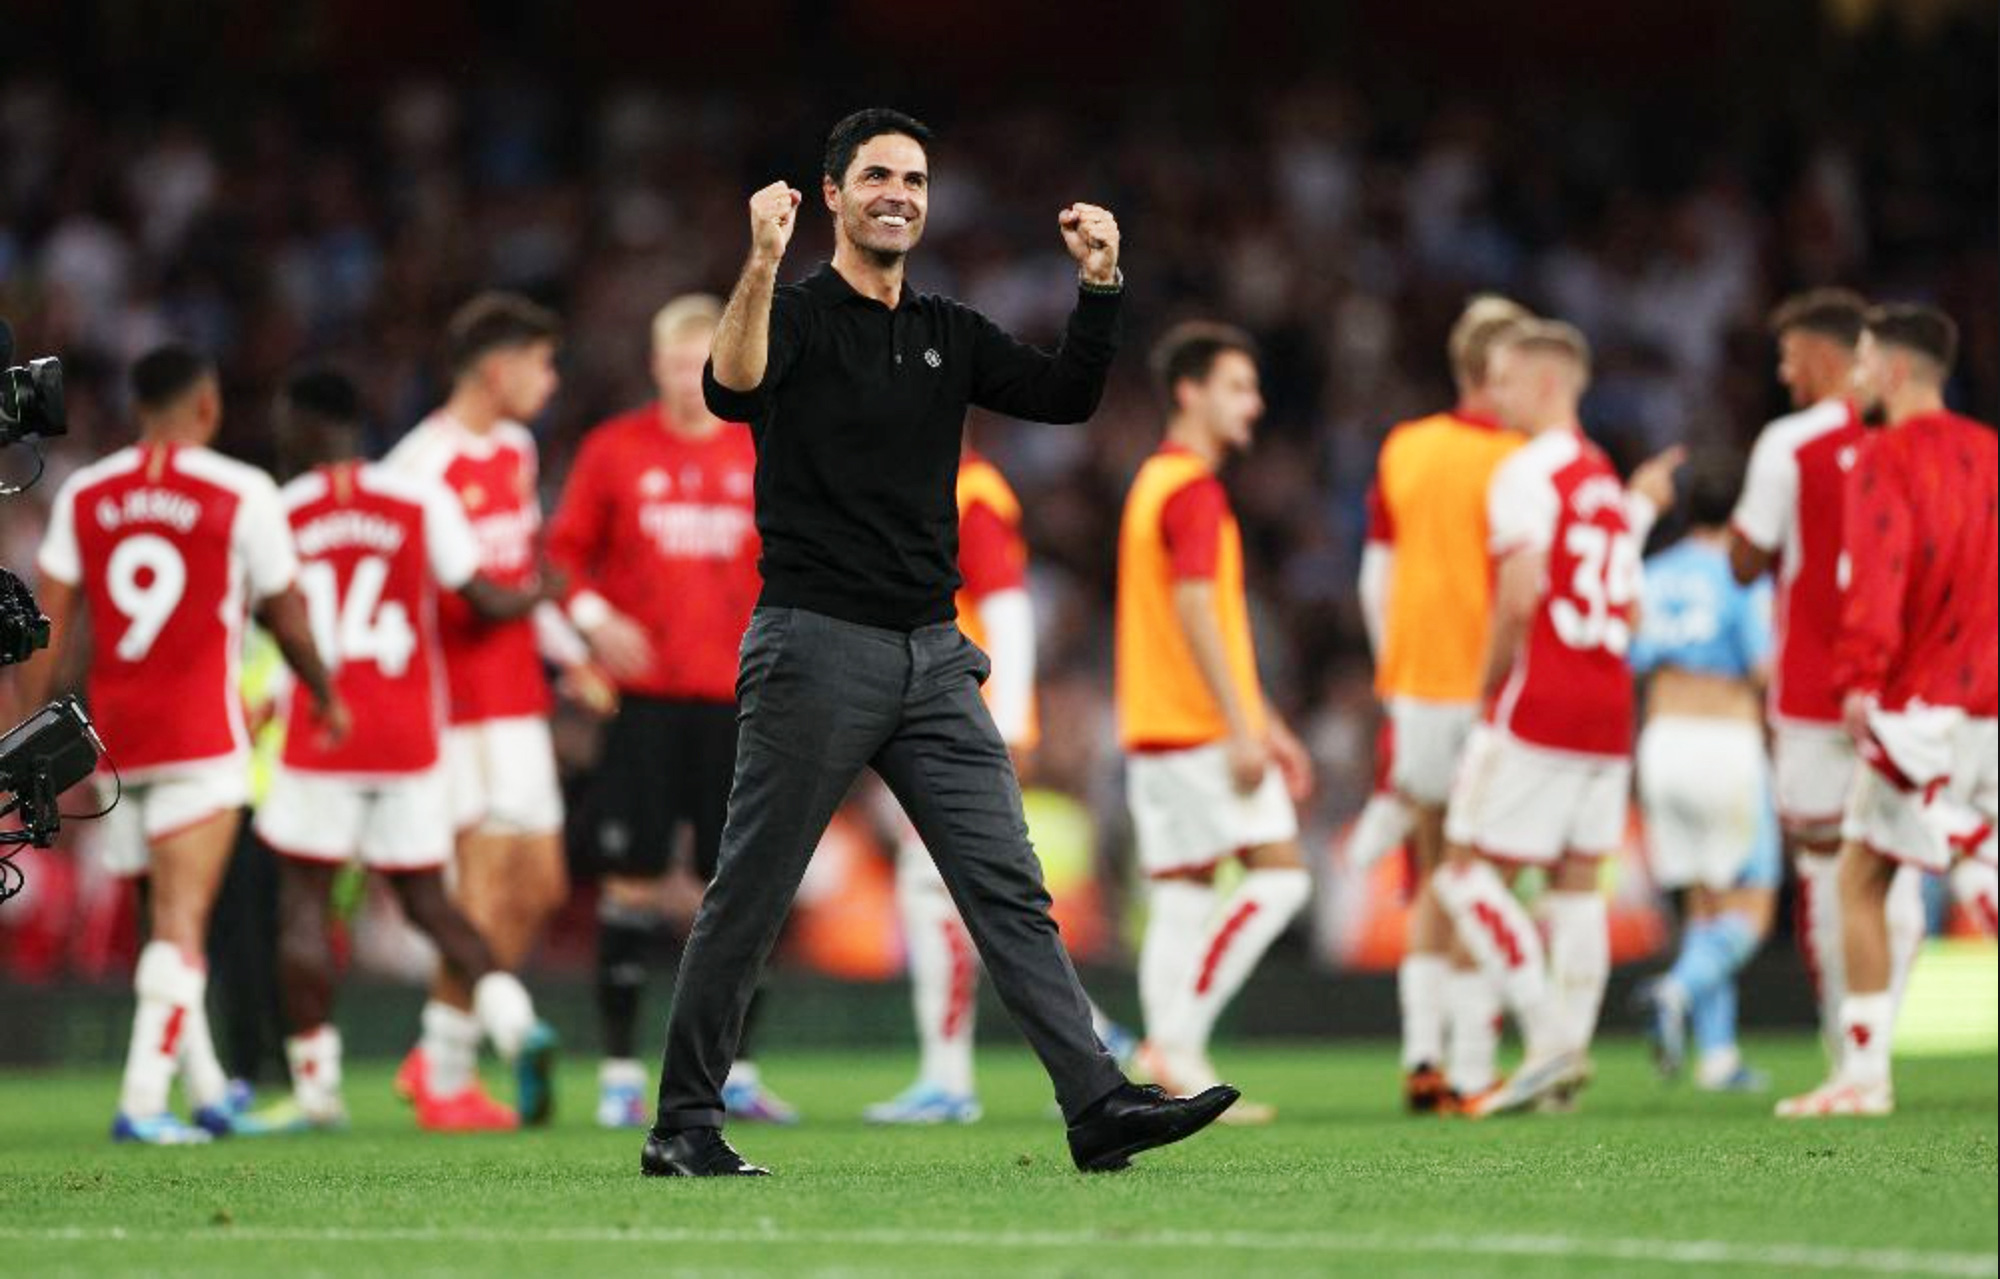 Arsenal Club is increasing its prices rapidly under the leadership of Mikel Arteta - Photo: Getty